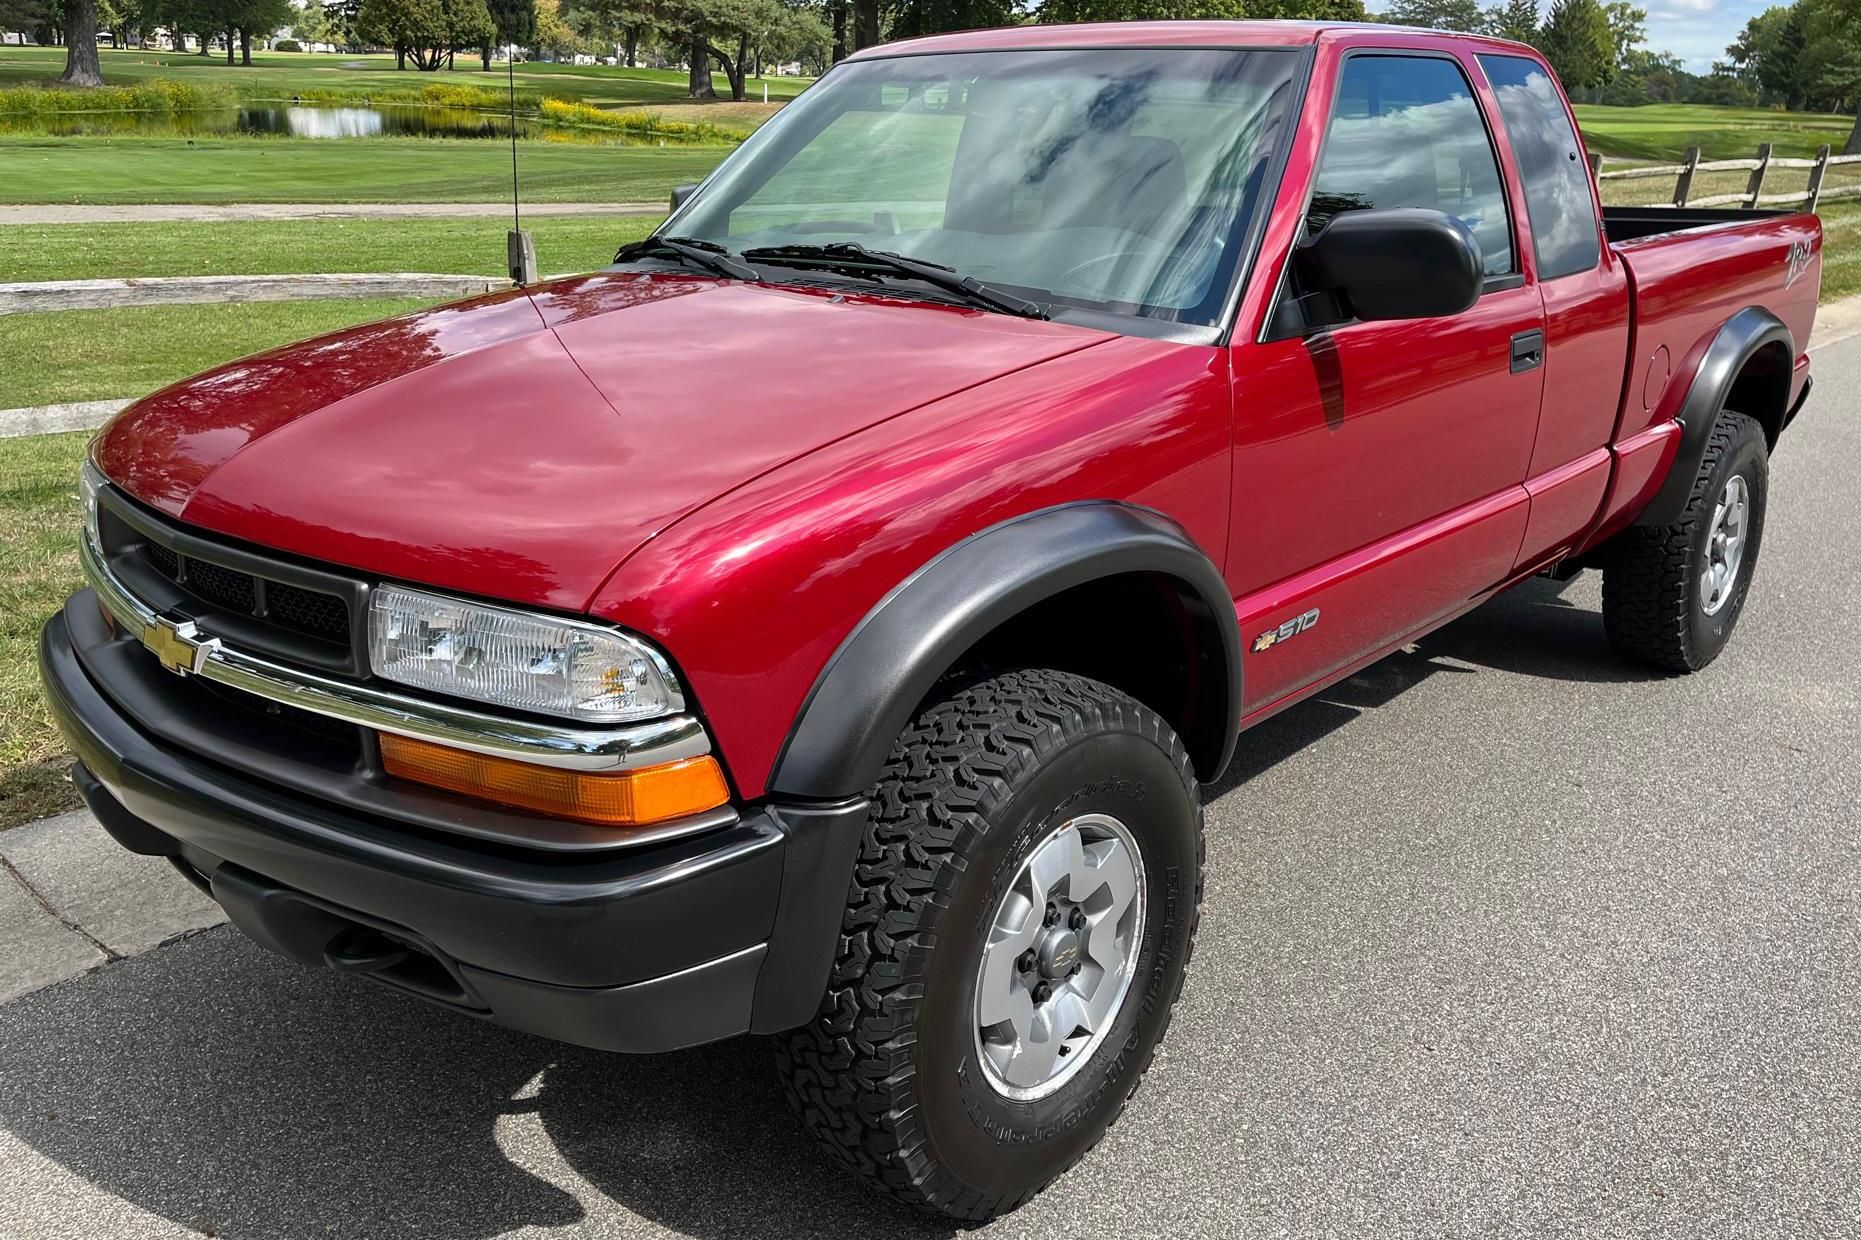 Almost-New 2003 Chevy S-10 ZR2 Up For Sale